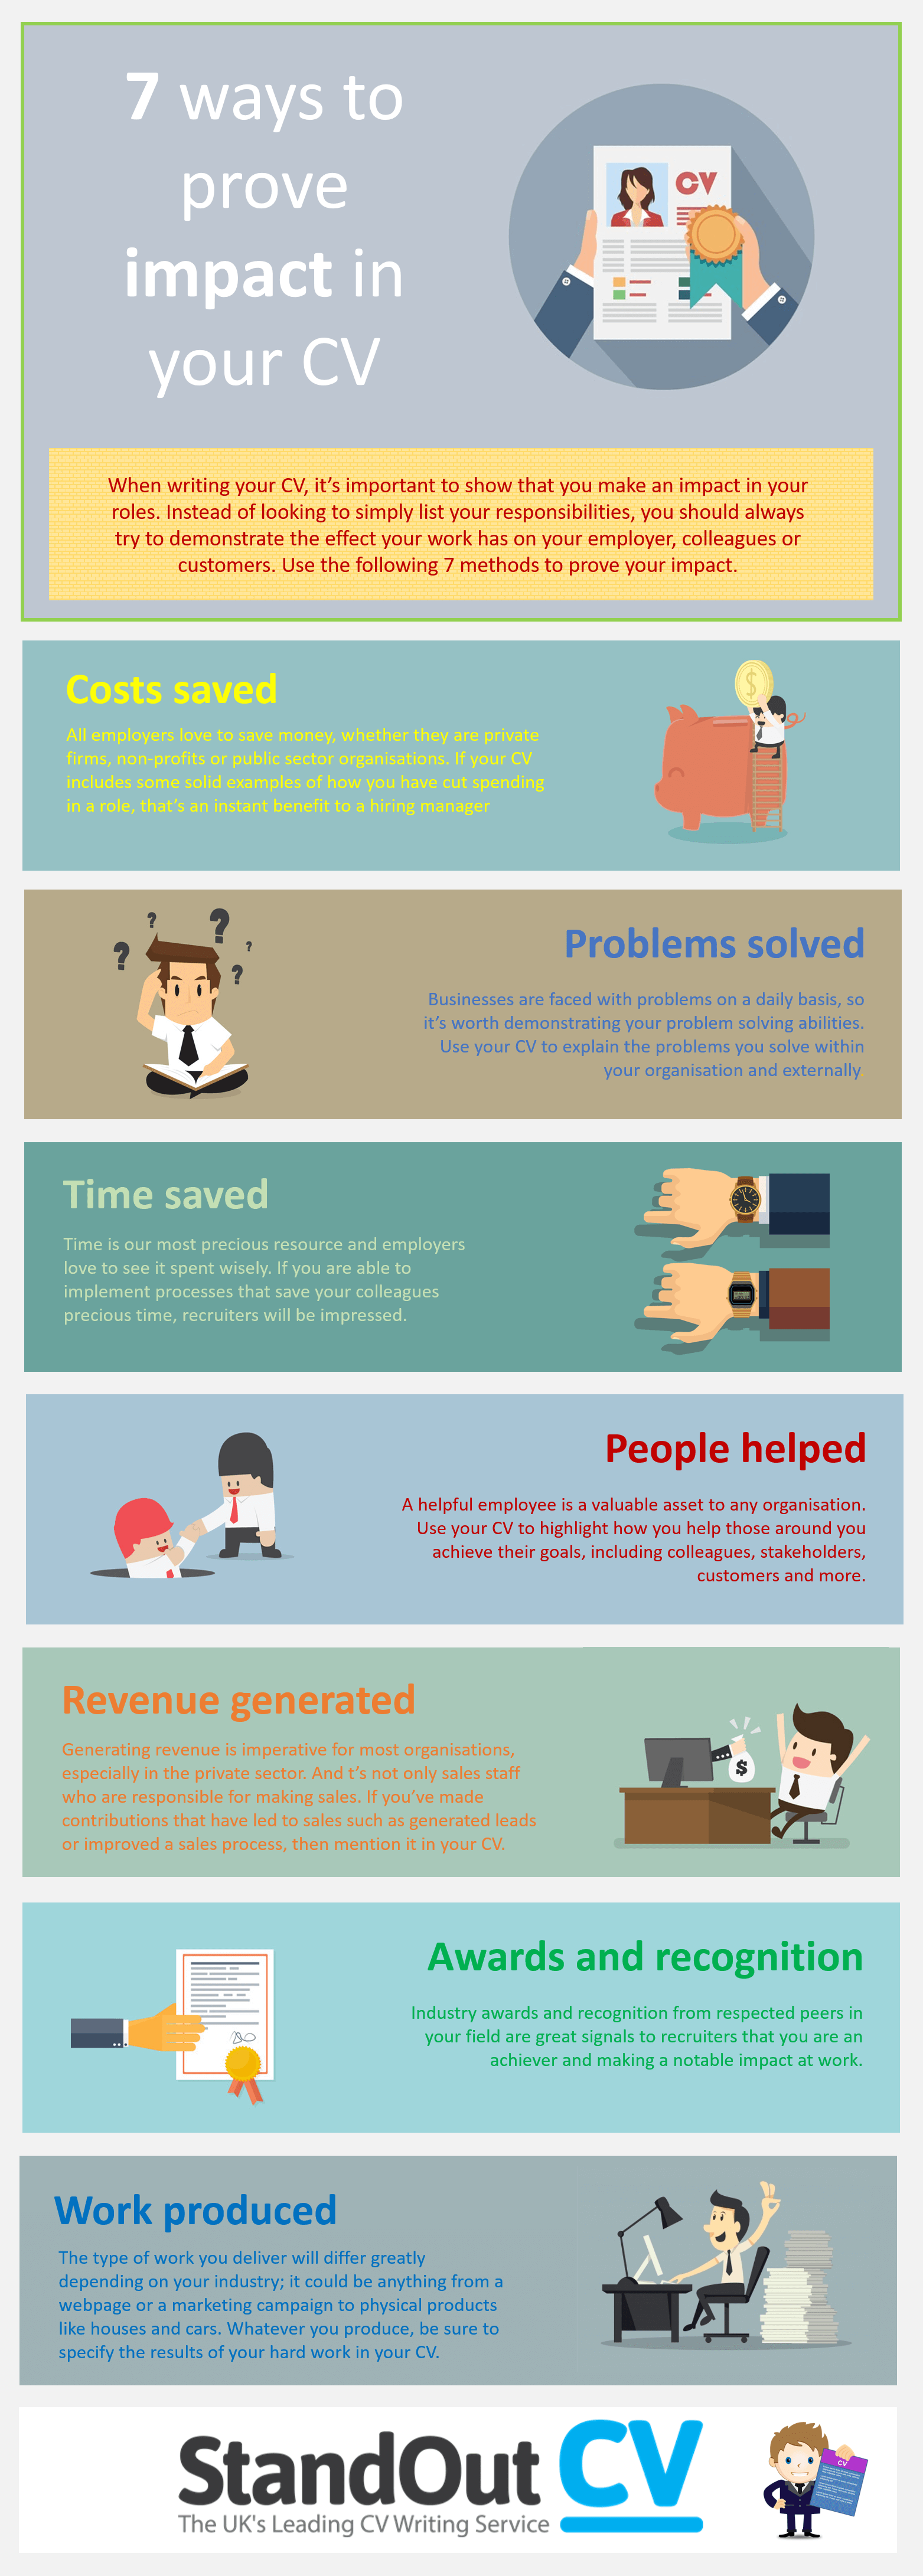 7 Ways to Prove Impact in Your CV Infographic